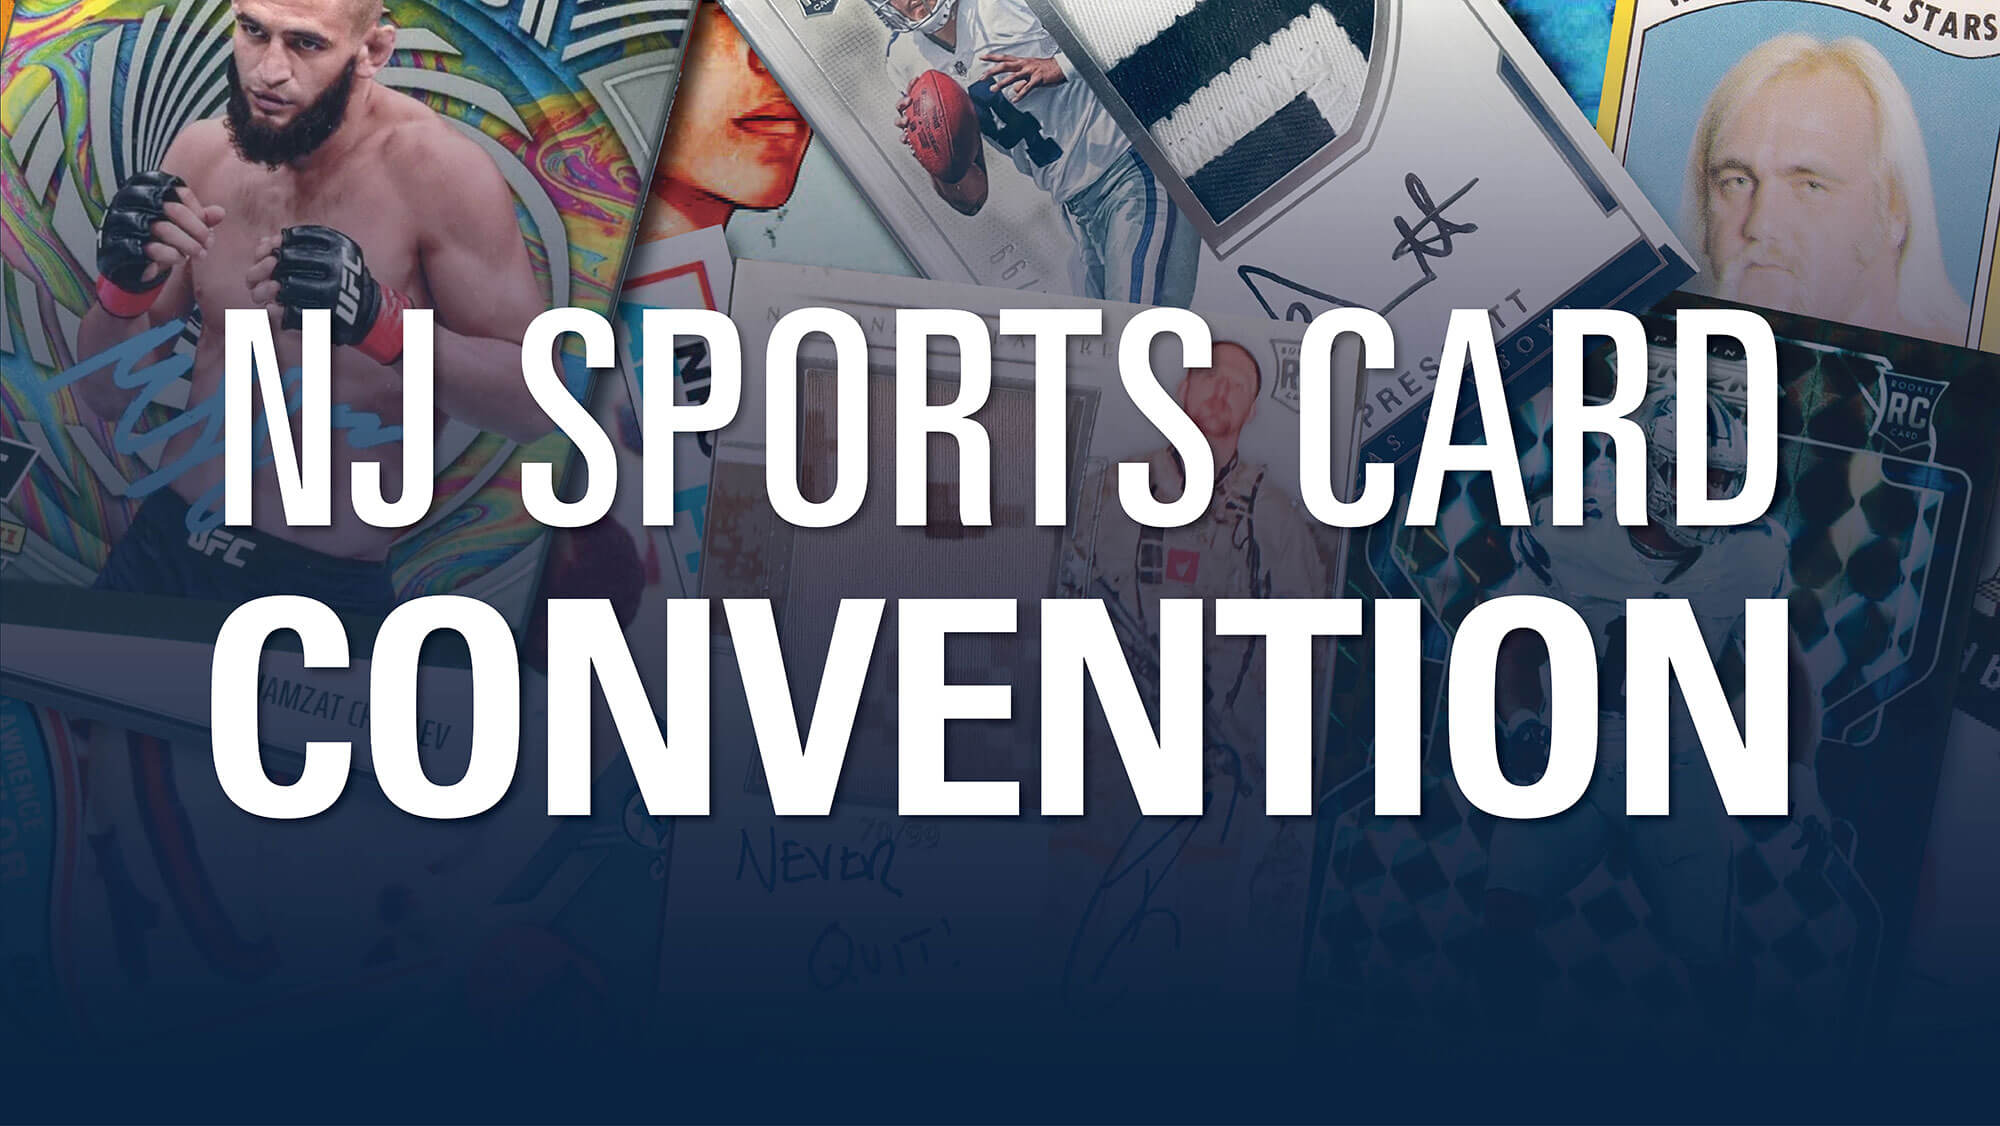 NJ Sports Card Convention